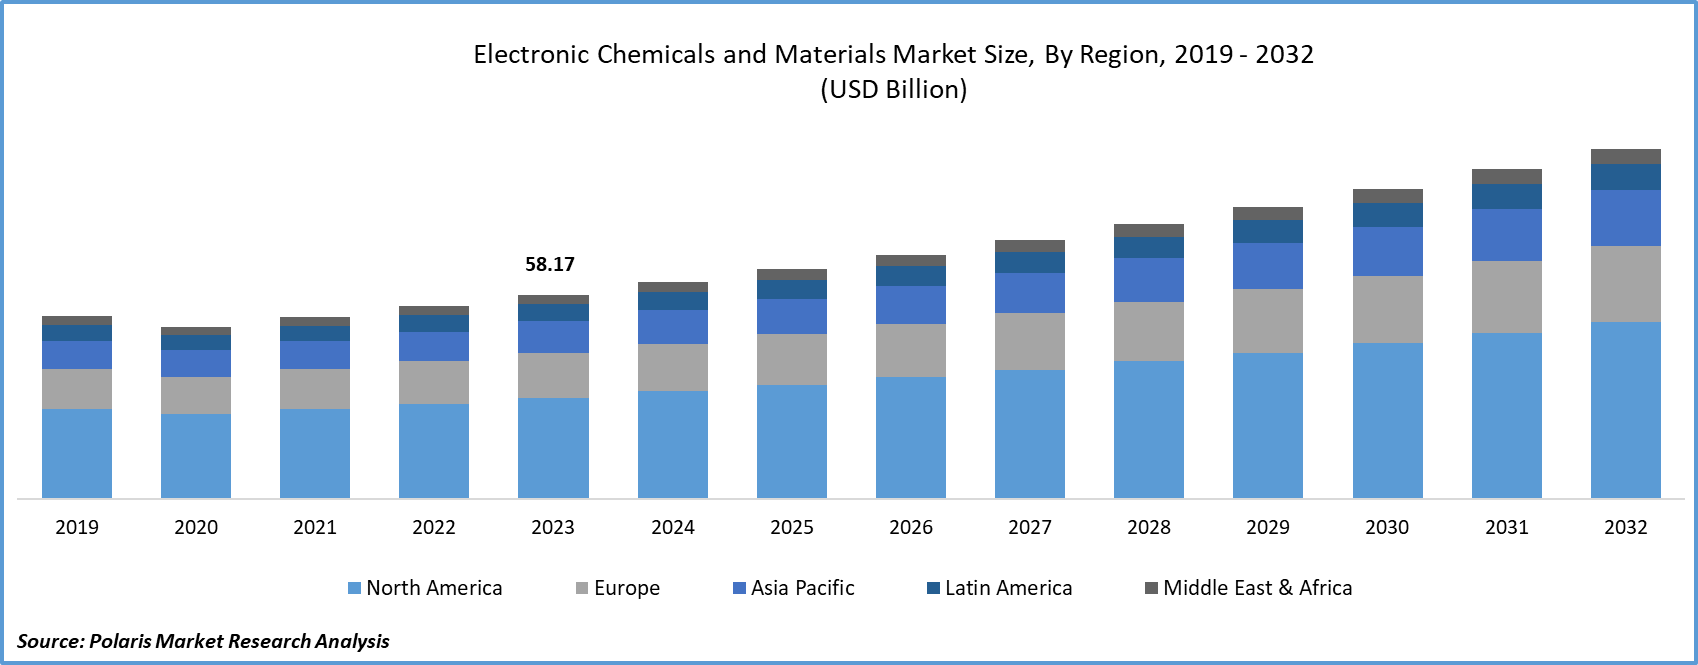 Electronic Chemicals and Materials Market Size